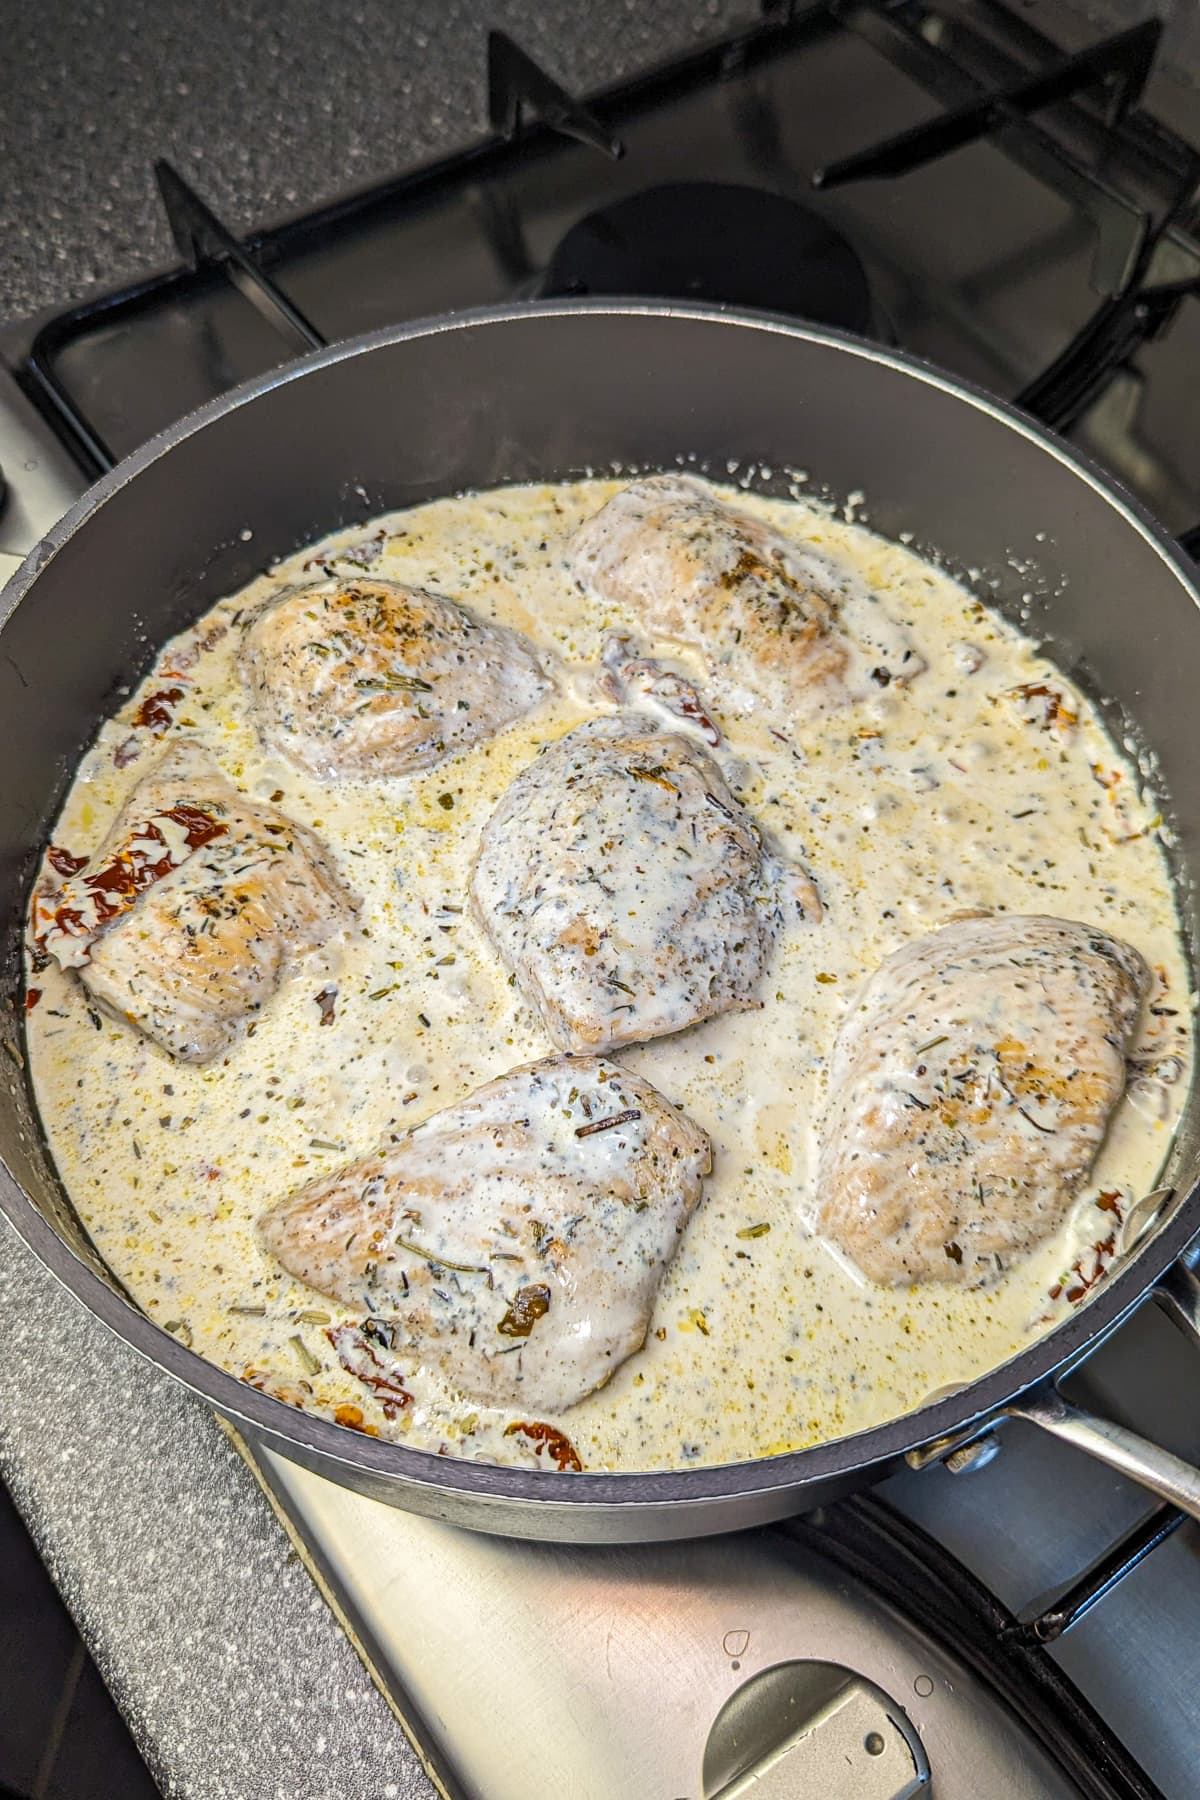 The skillet with chicken and sun-dried tomatoes now also has a creamy sauce added, bubbling around the edges.